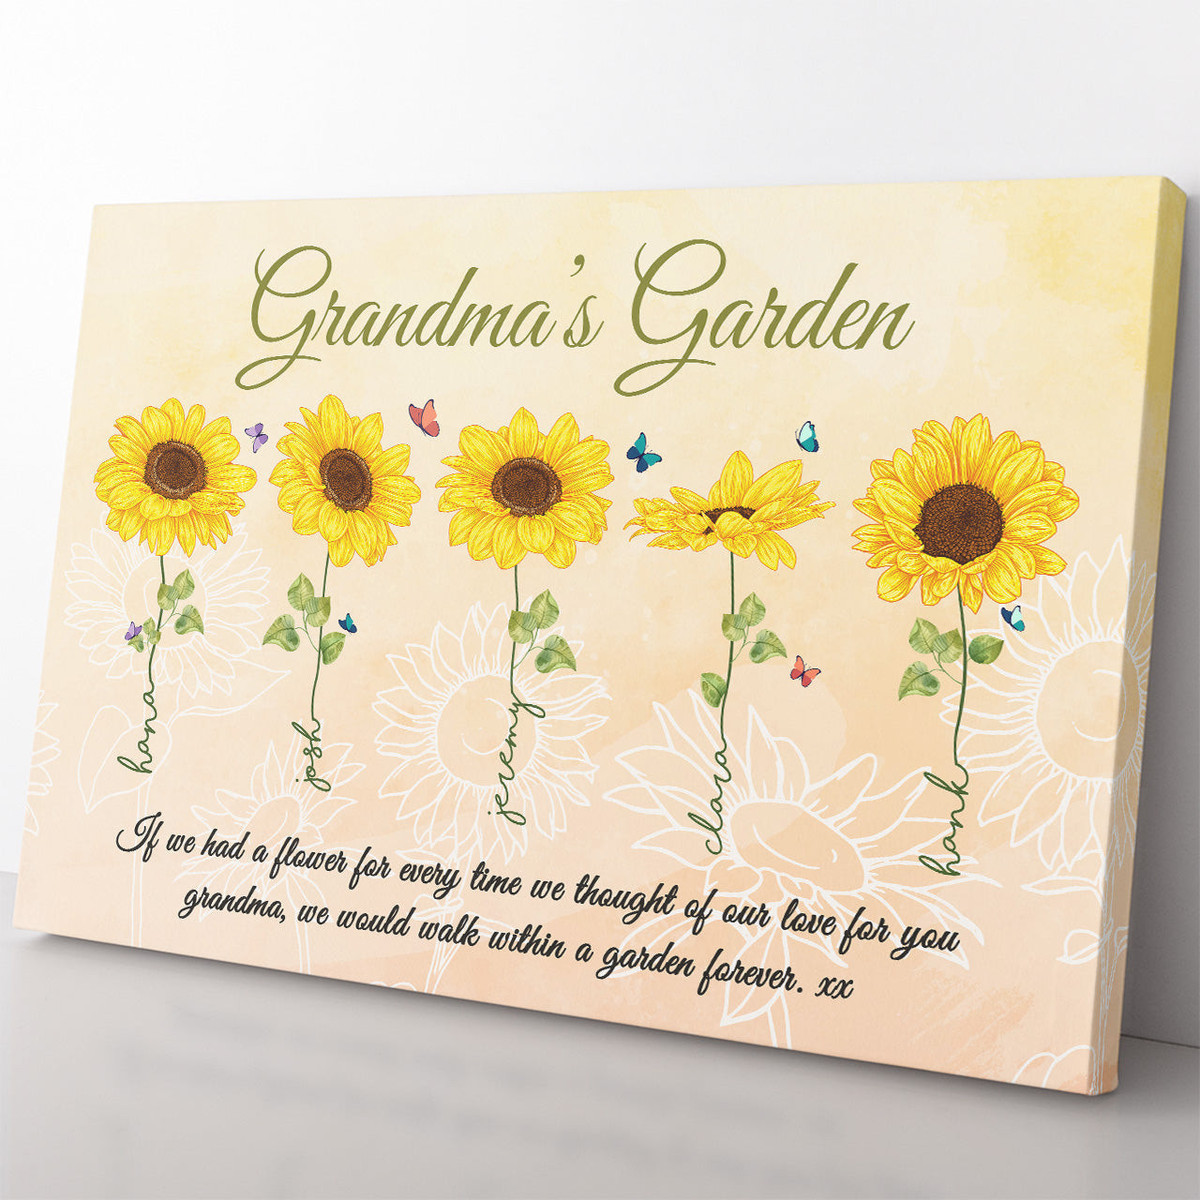 Personalized Grandkid Names Grandma's Garden Sunflower Canvas Gift Ideas, Thought of Our Love for You Canvas Gift for Grandma